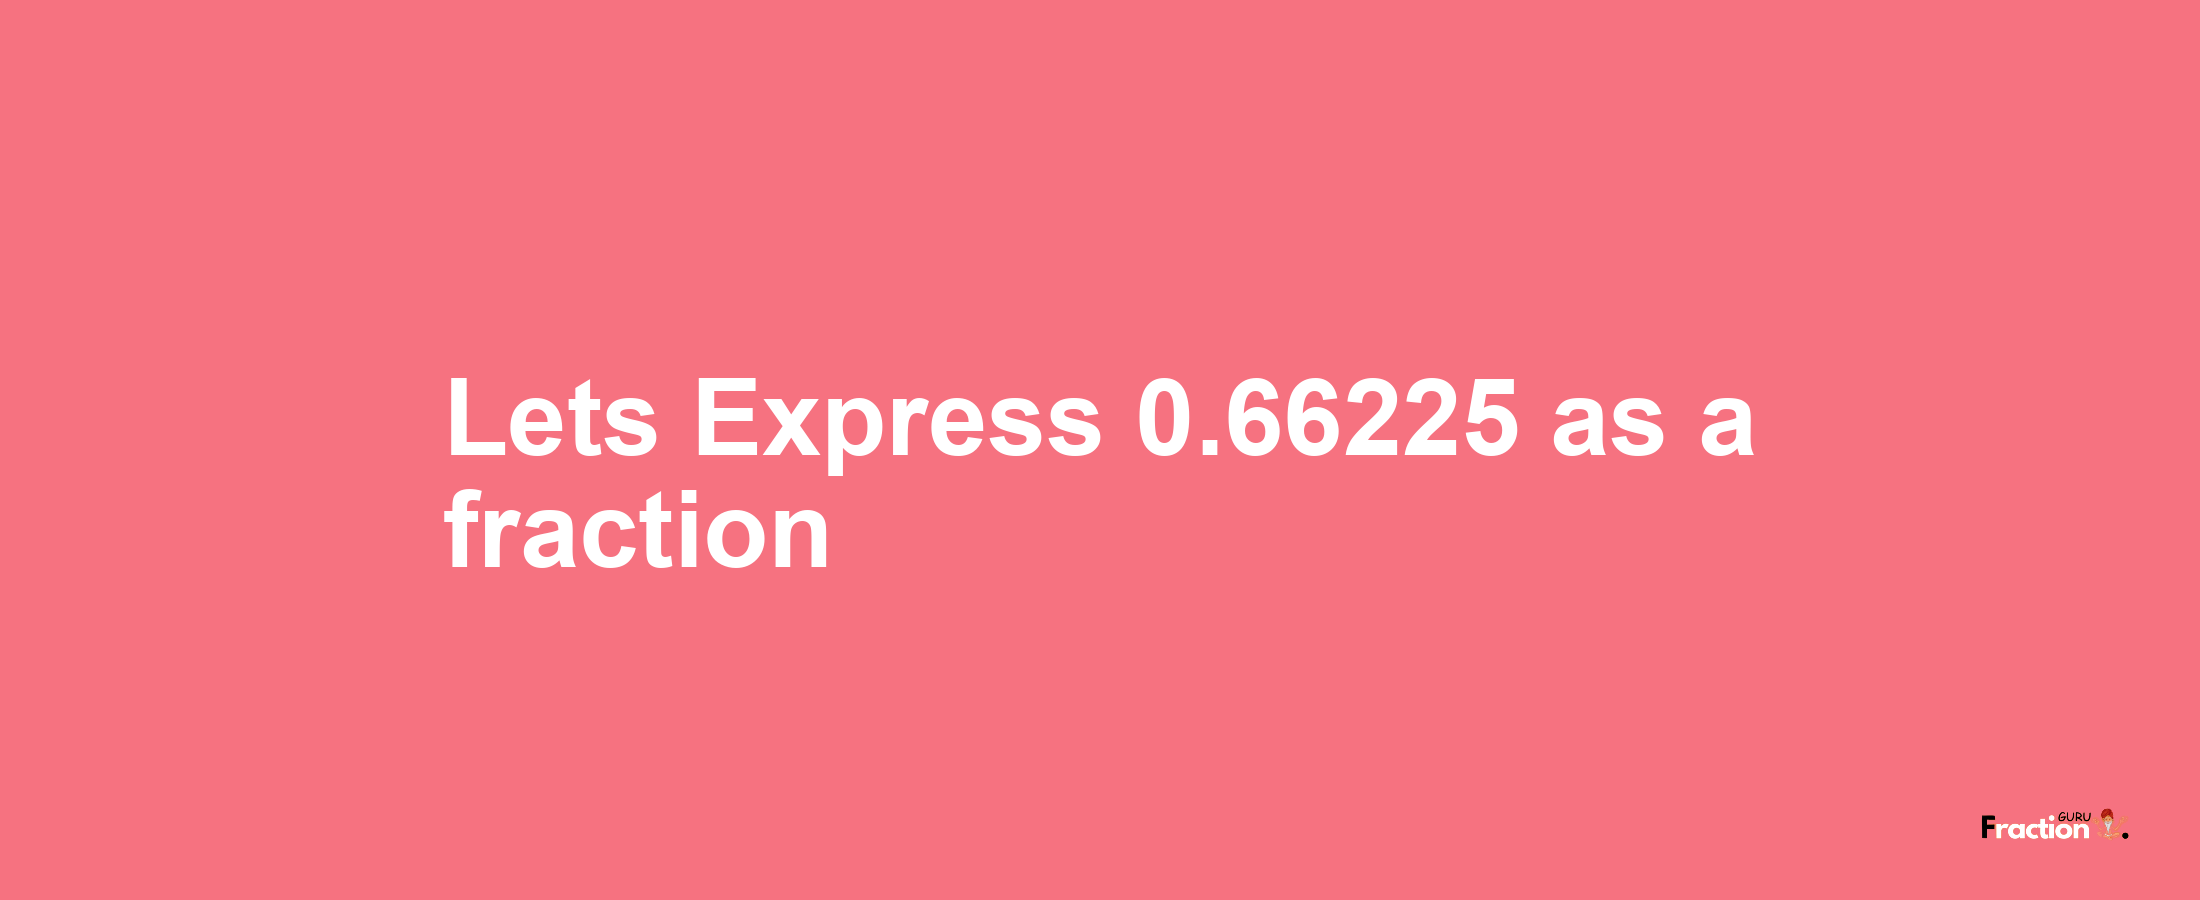 Lets Express 0.66225 as afraction